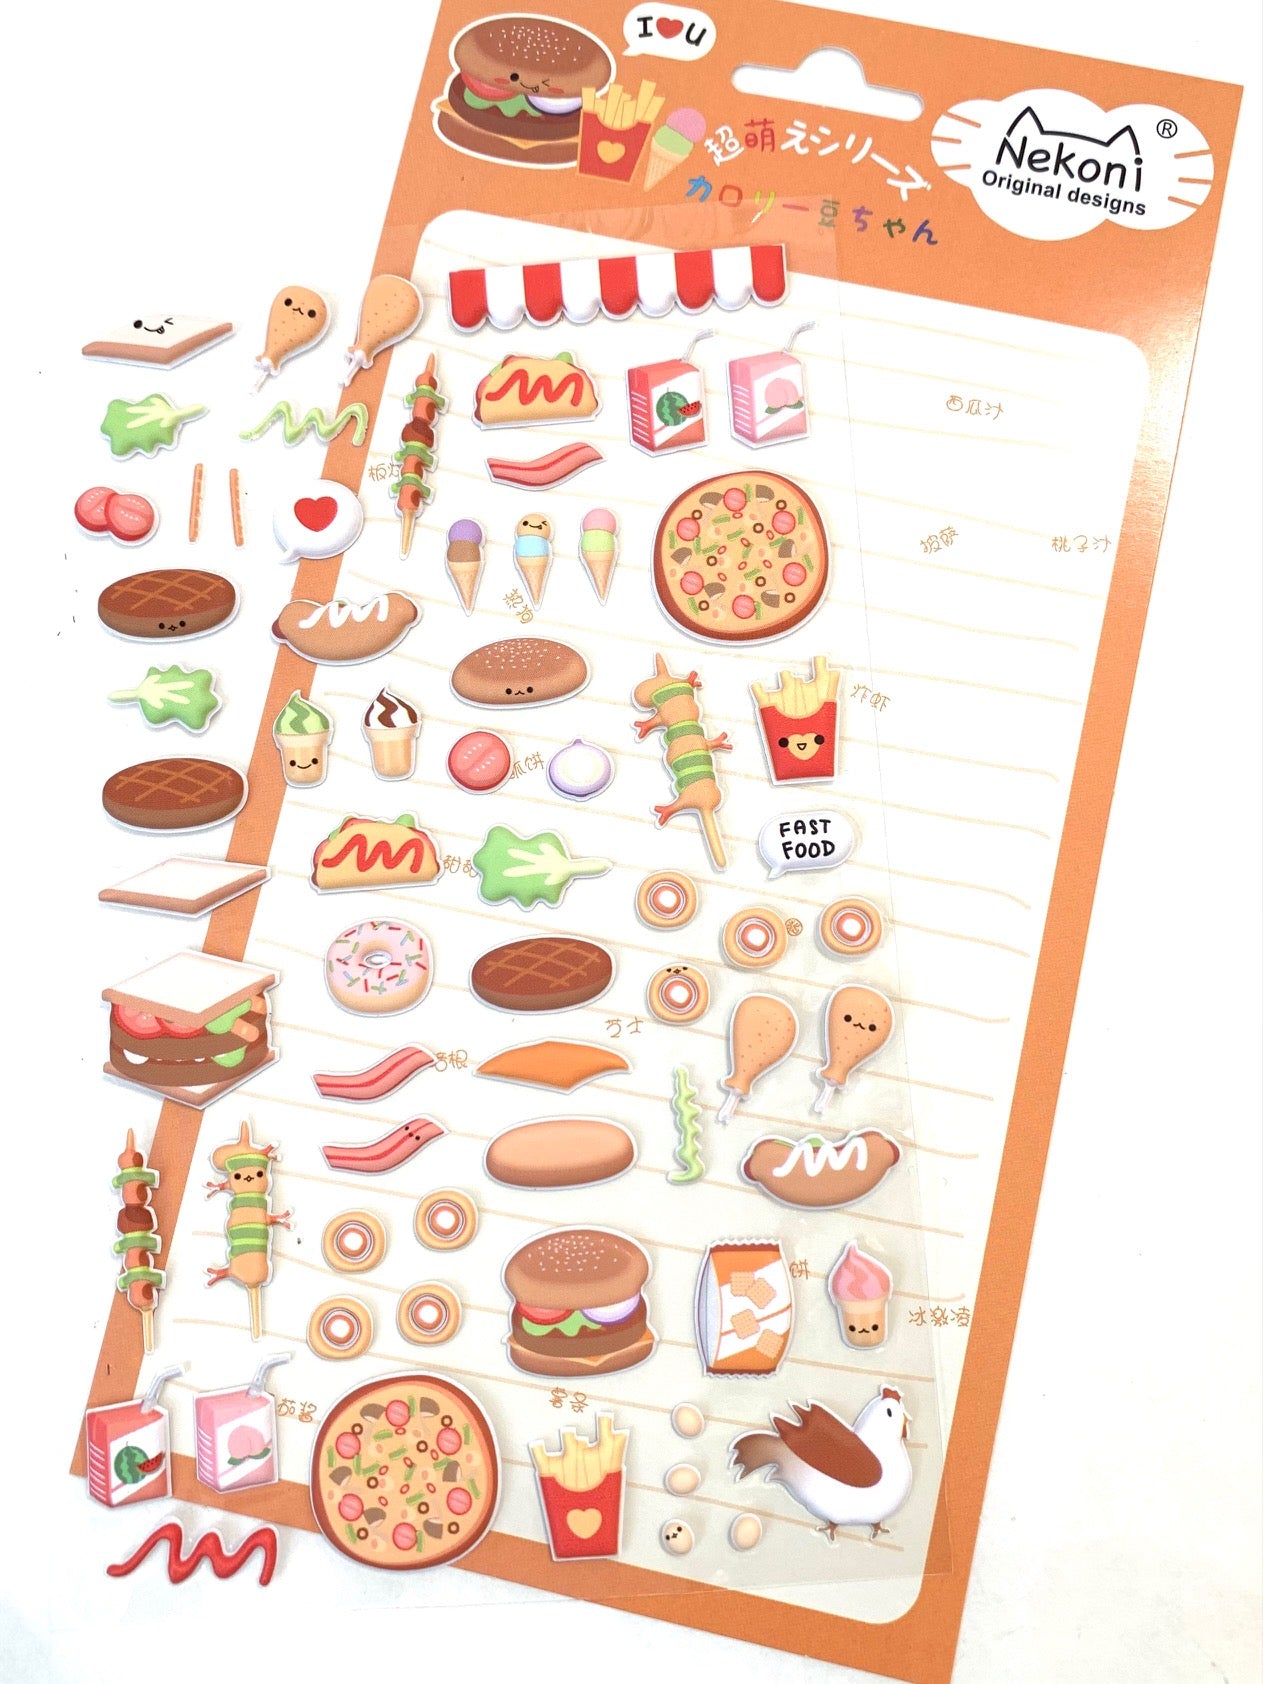 Fast Food Stickers Bundles Graphic by sportspsd99 · Creative Fabrica